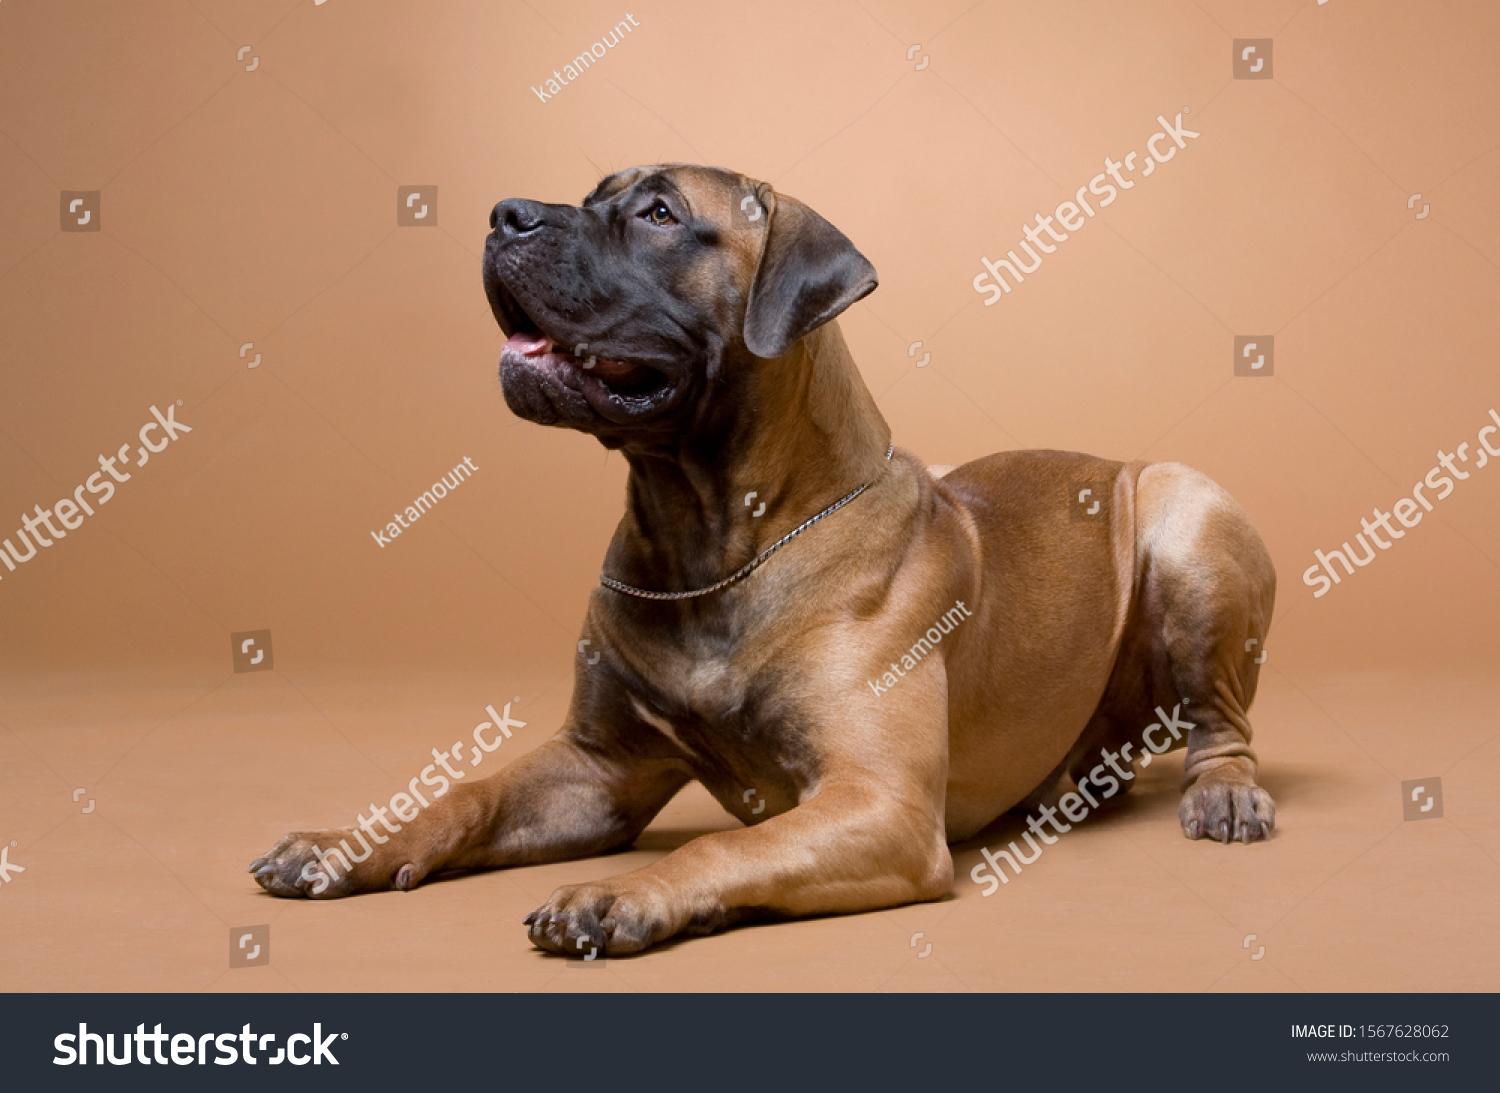 large red dog South African boerboel breed is photographed in a photo studio on a red background #1567628062